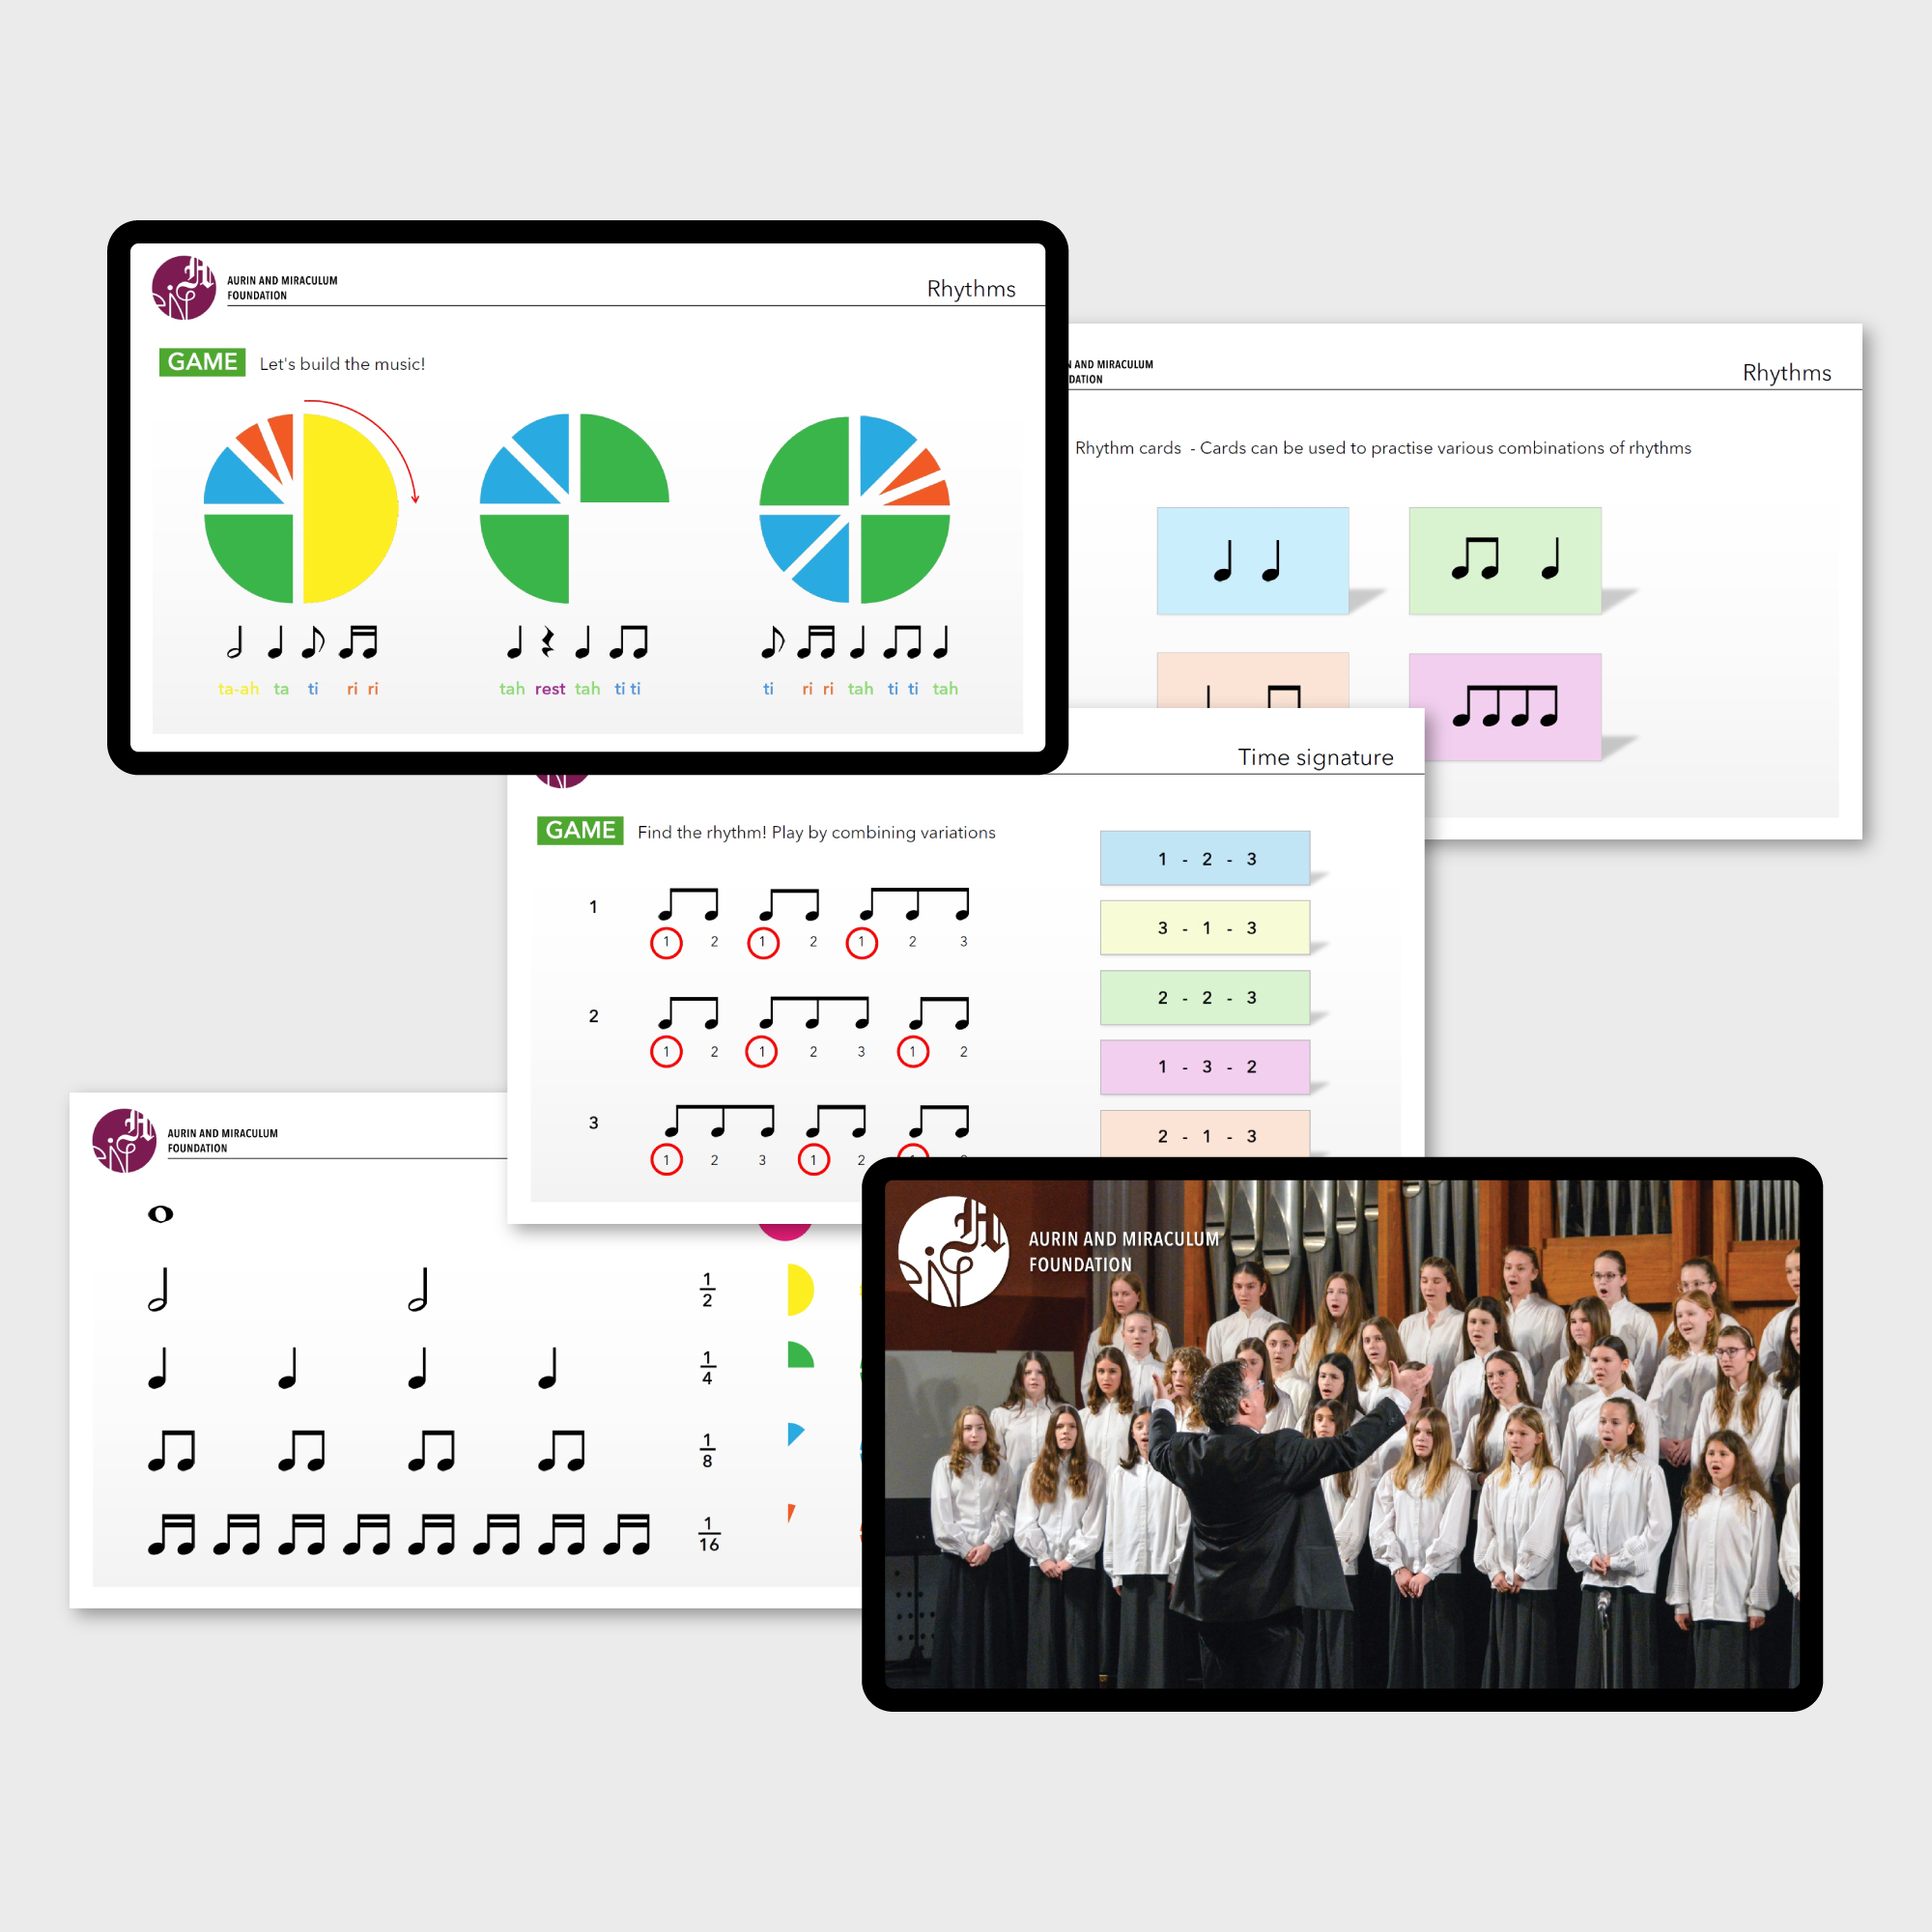 dyscalculia and music presentation